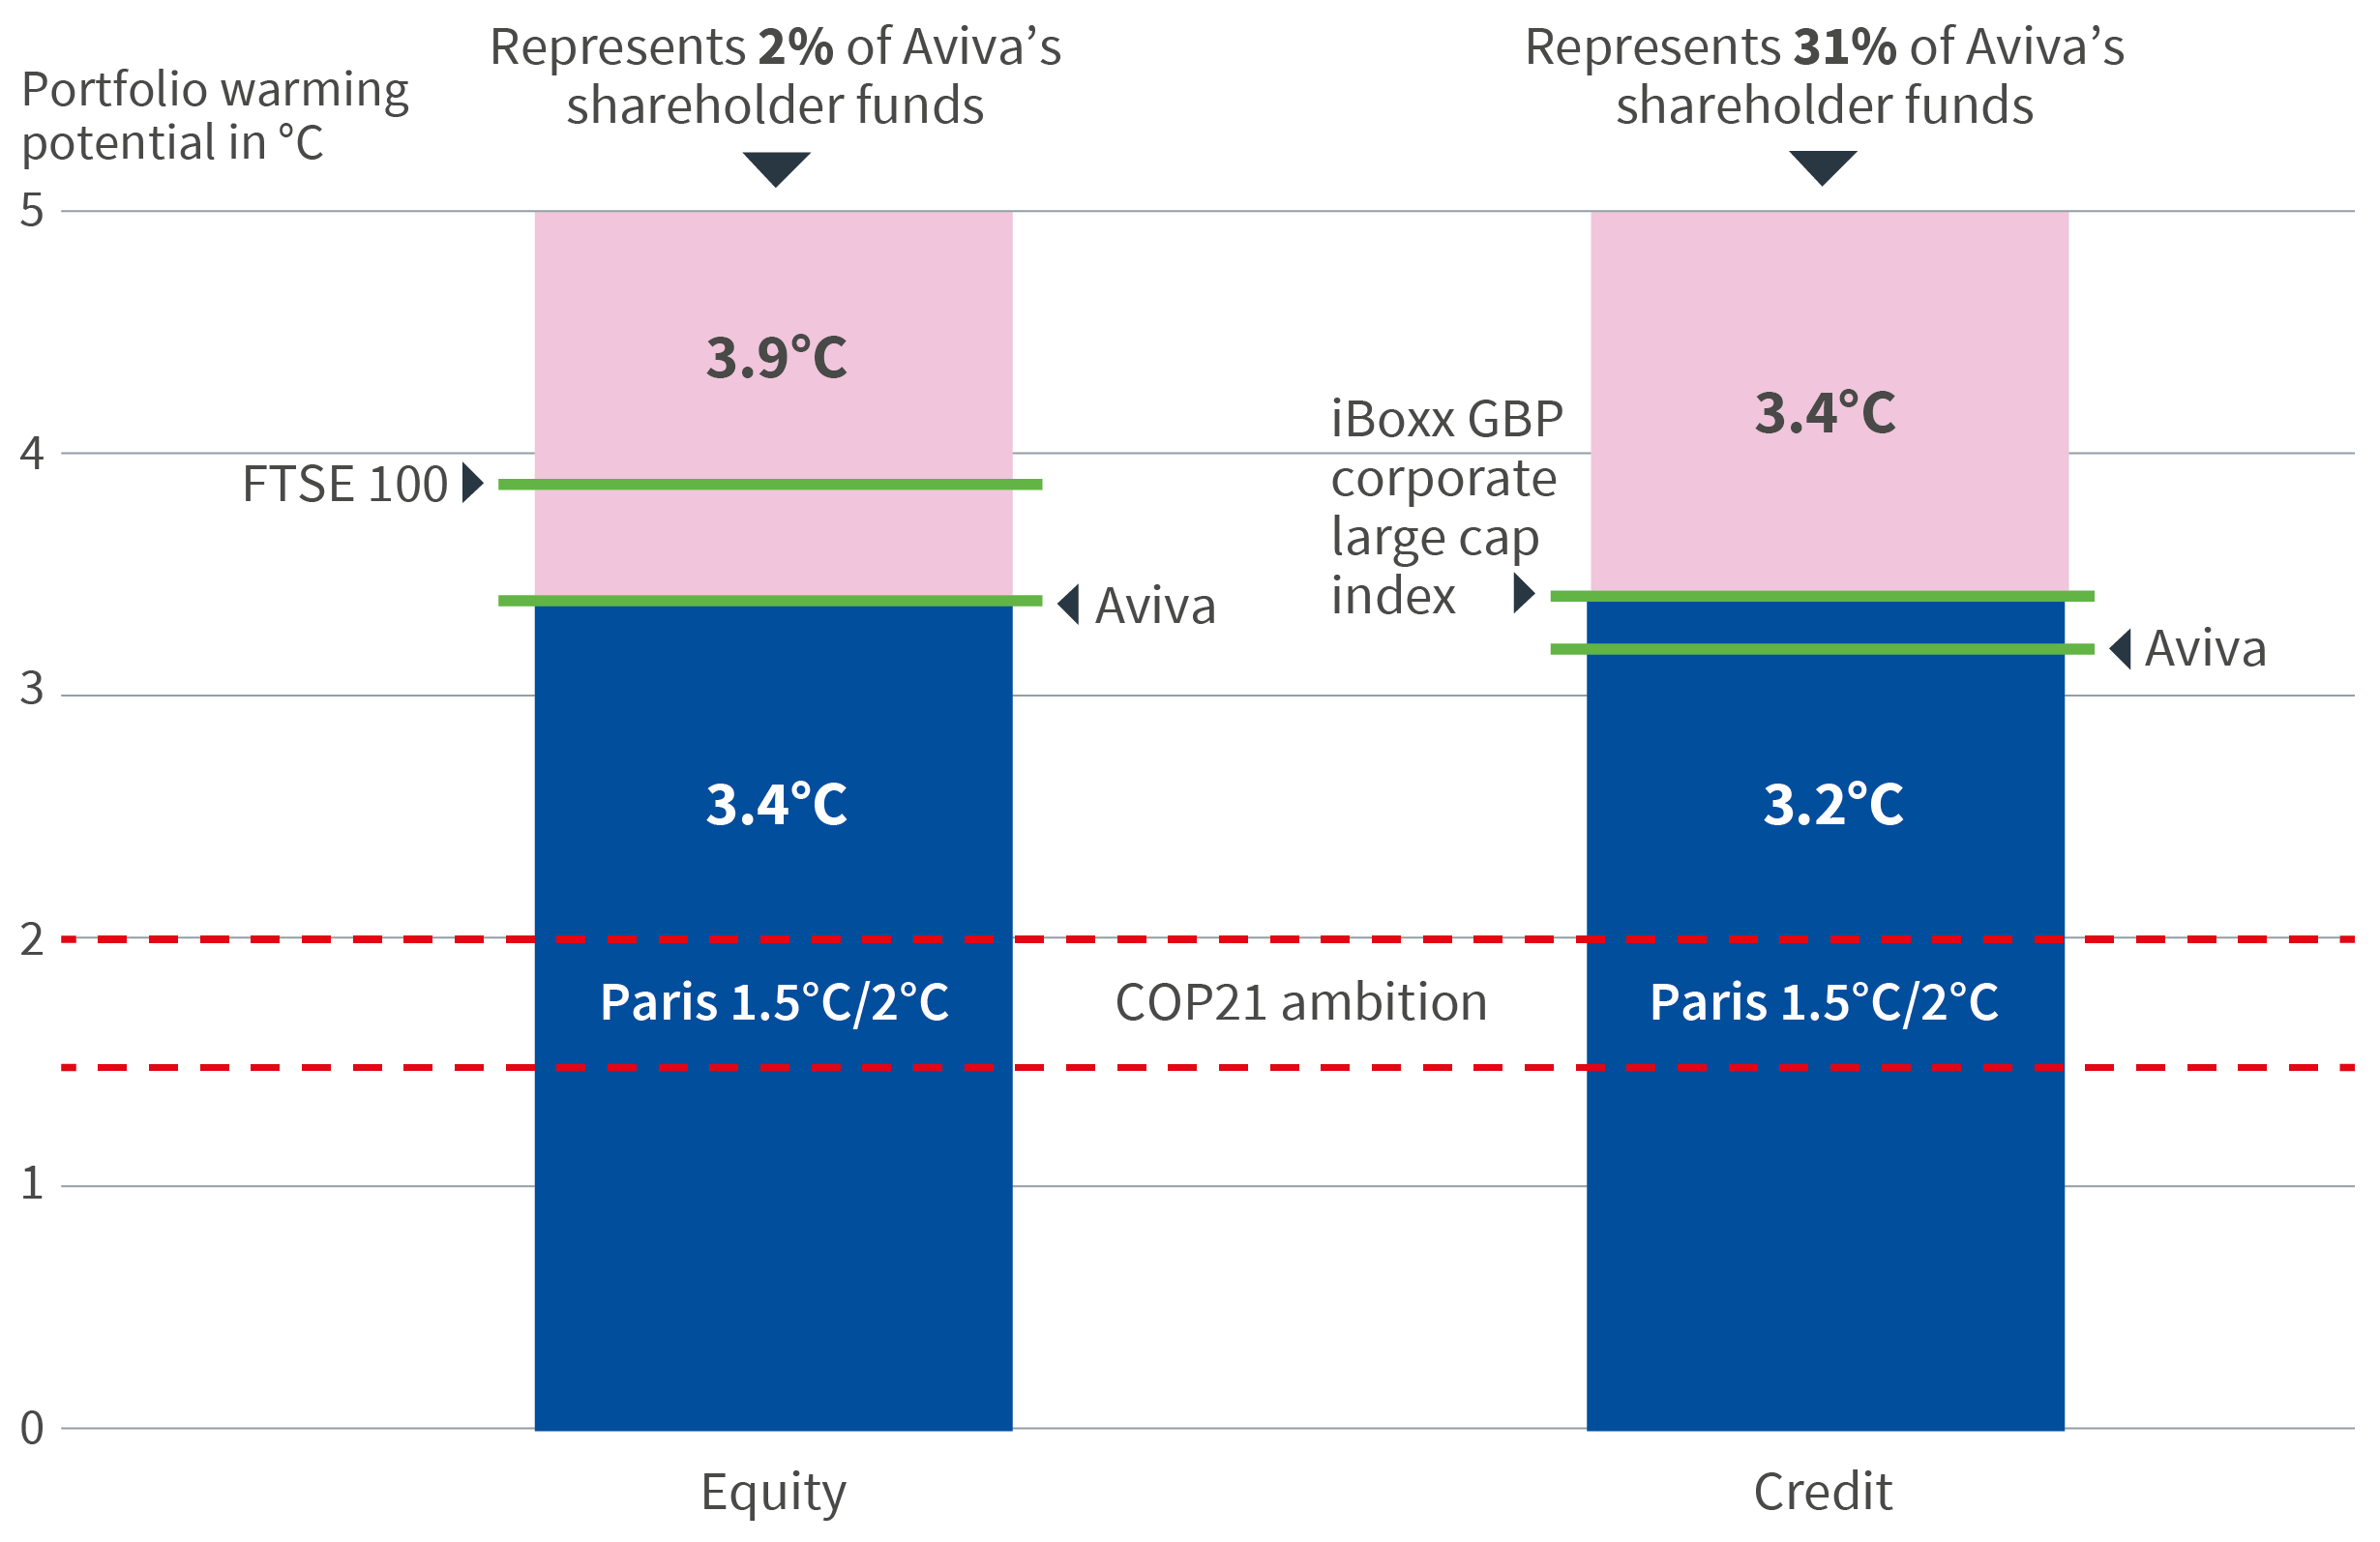 Corporate credit and equities warming potential (in°C) for Aviva’s shareholder funds